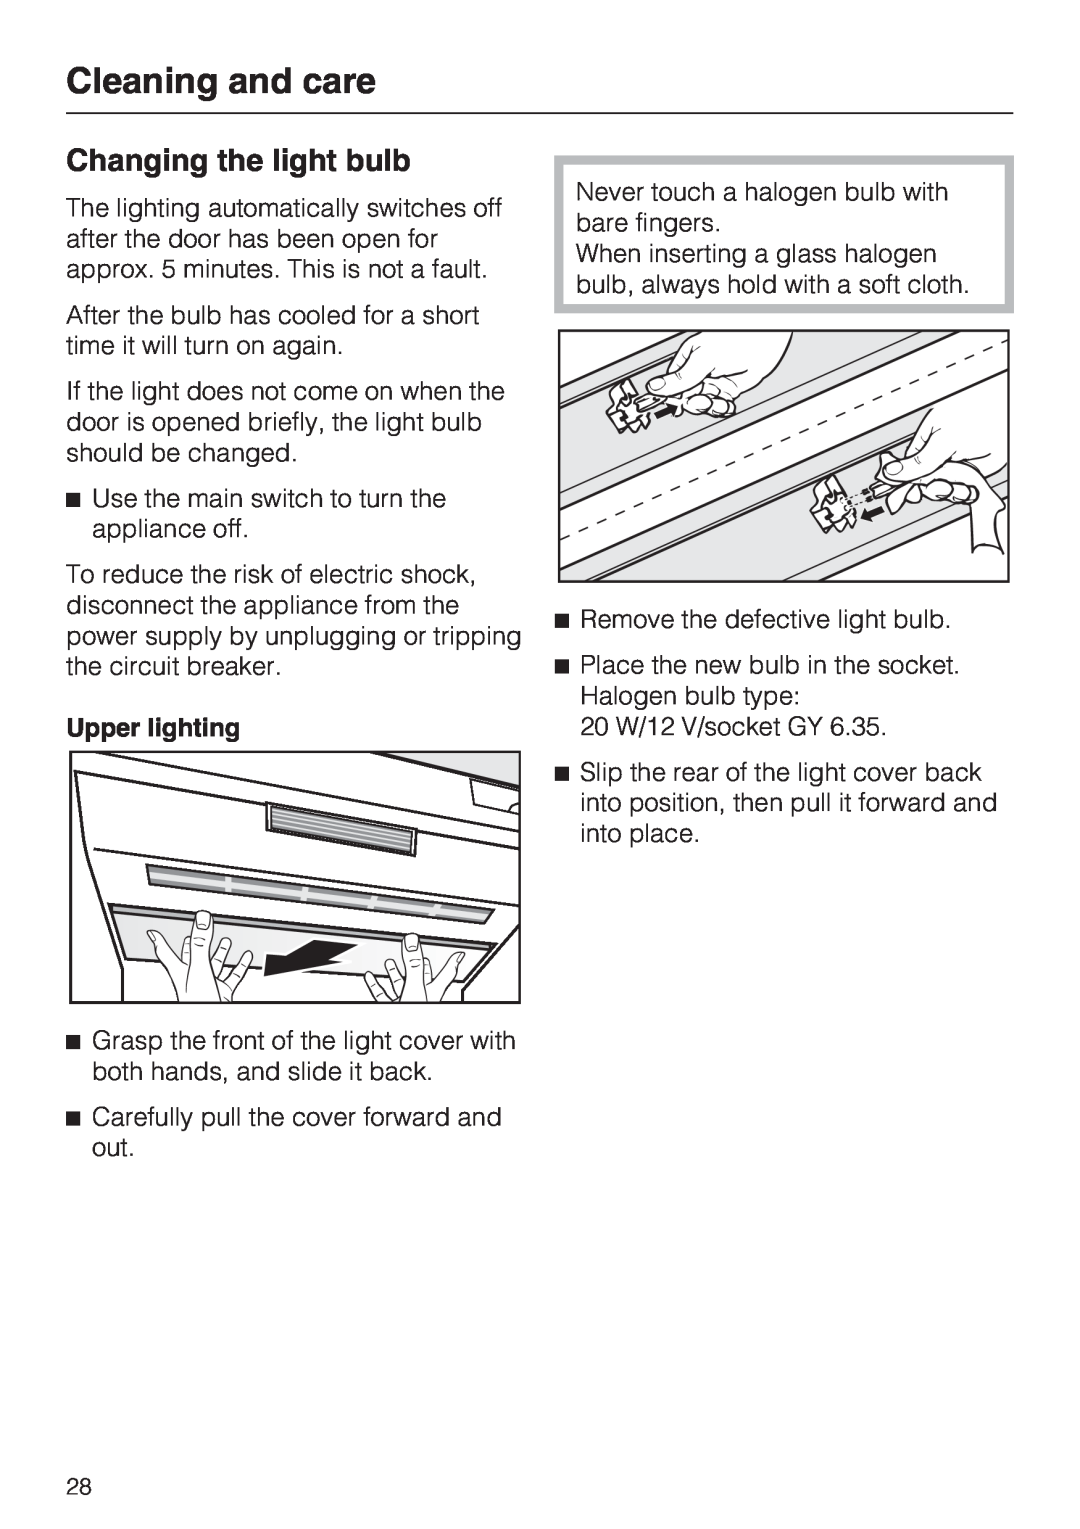 Miele K 1911 SF, K 1801 SF, K 1901 SF, K 1811 SF Changing the light bulb, Cleaning and care, Upper lighting 